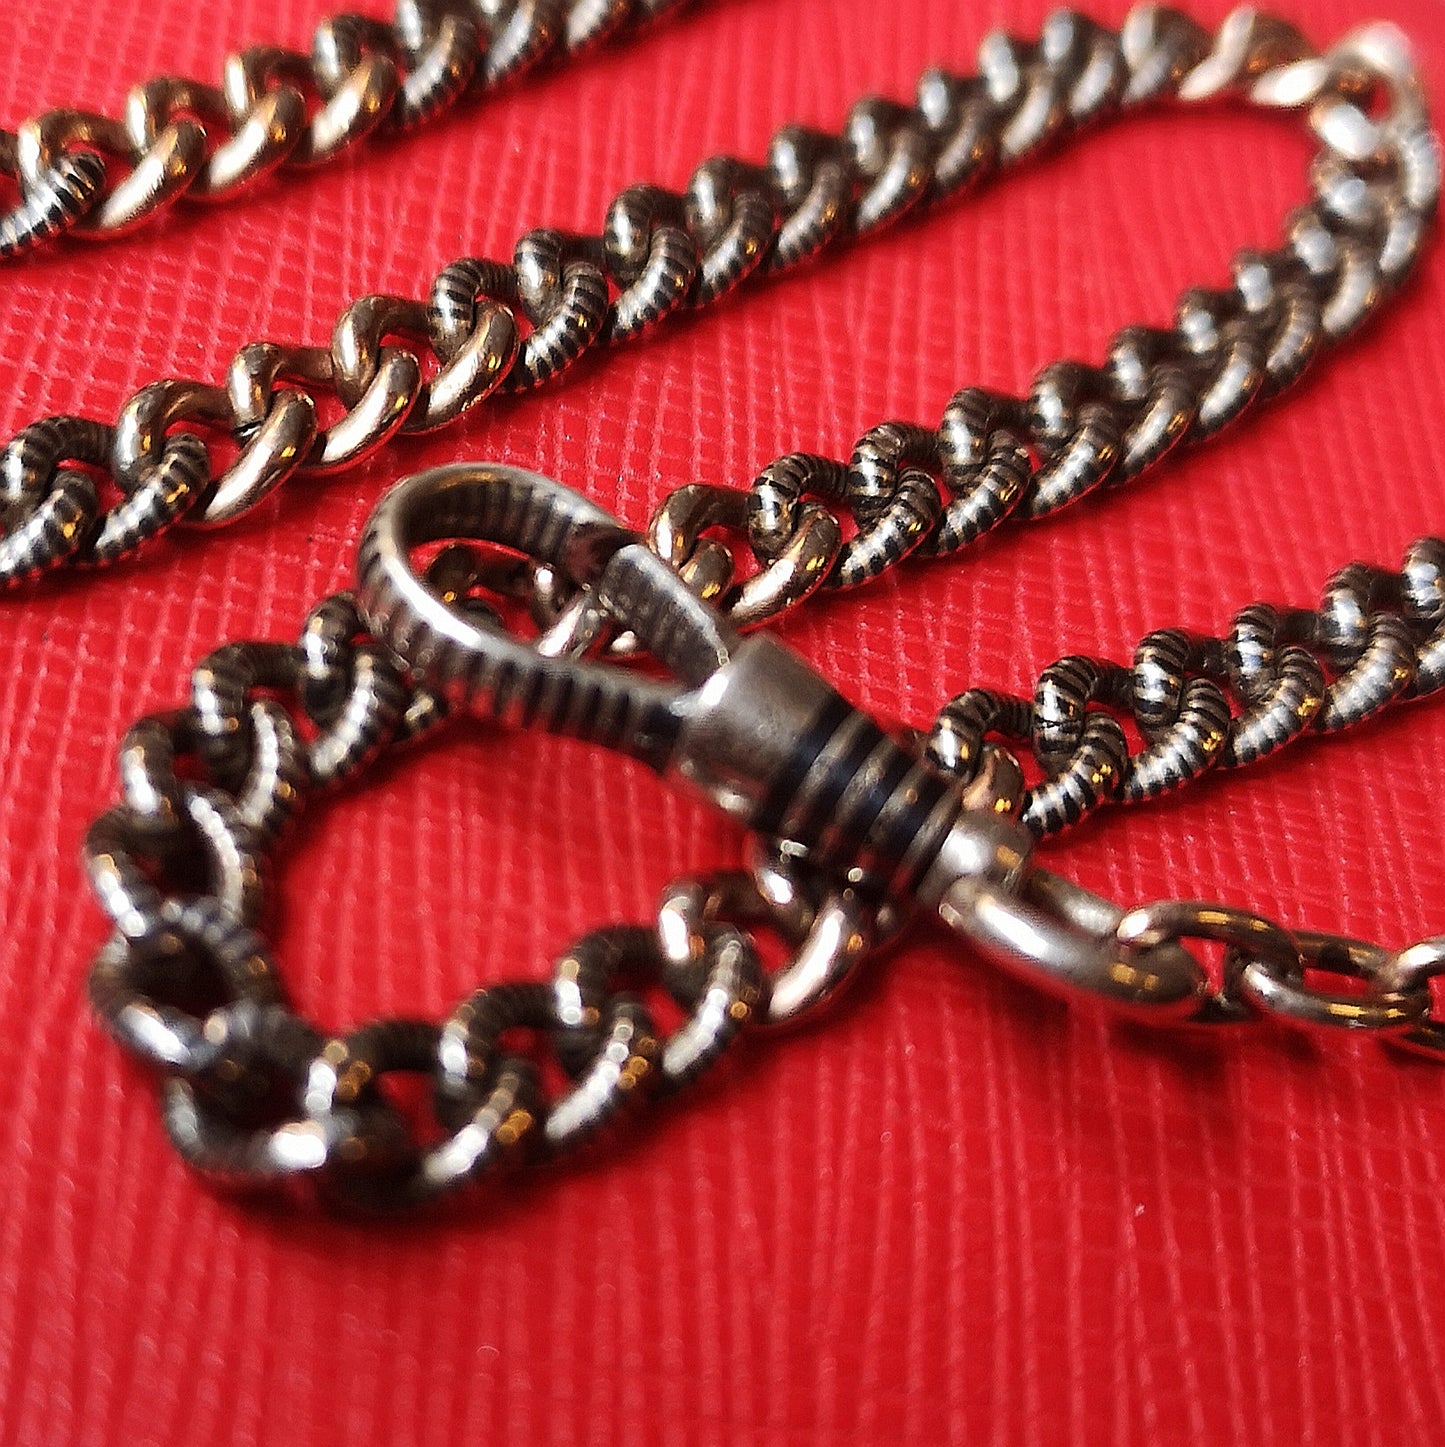 The niello watch chain with rose gold details